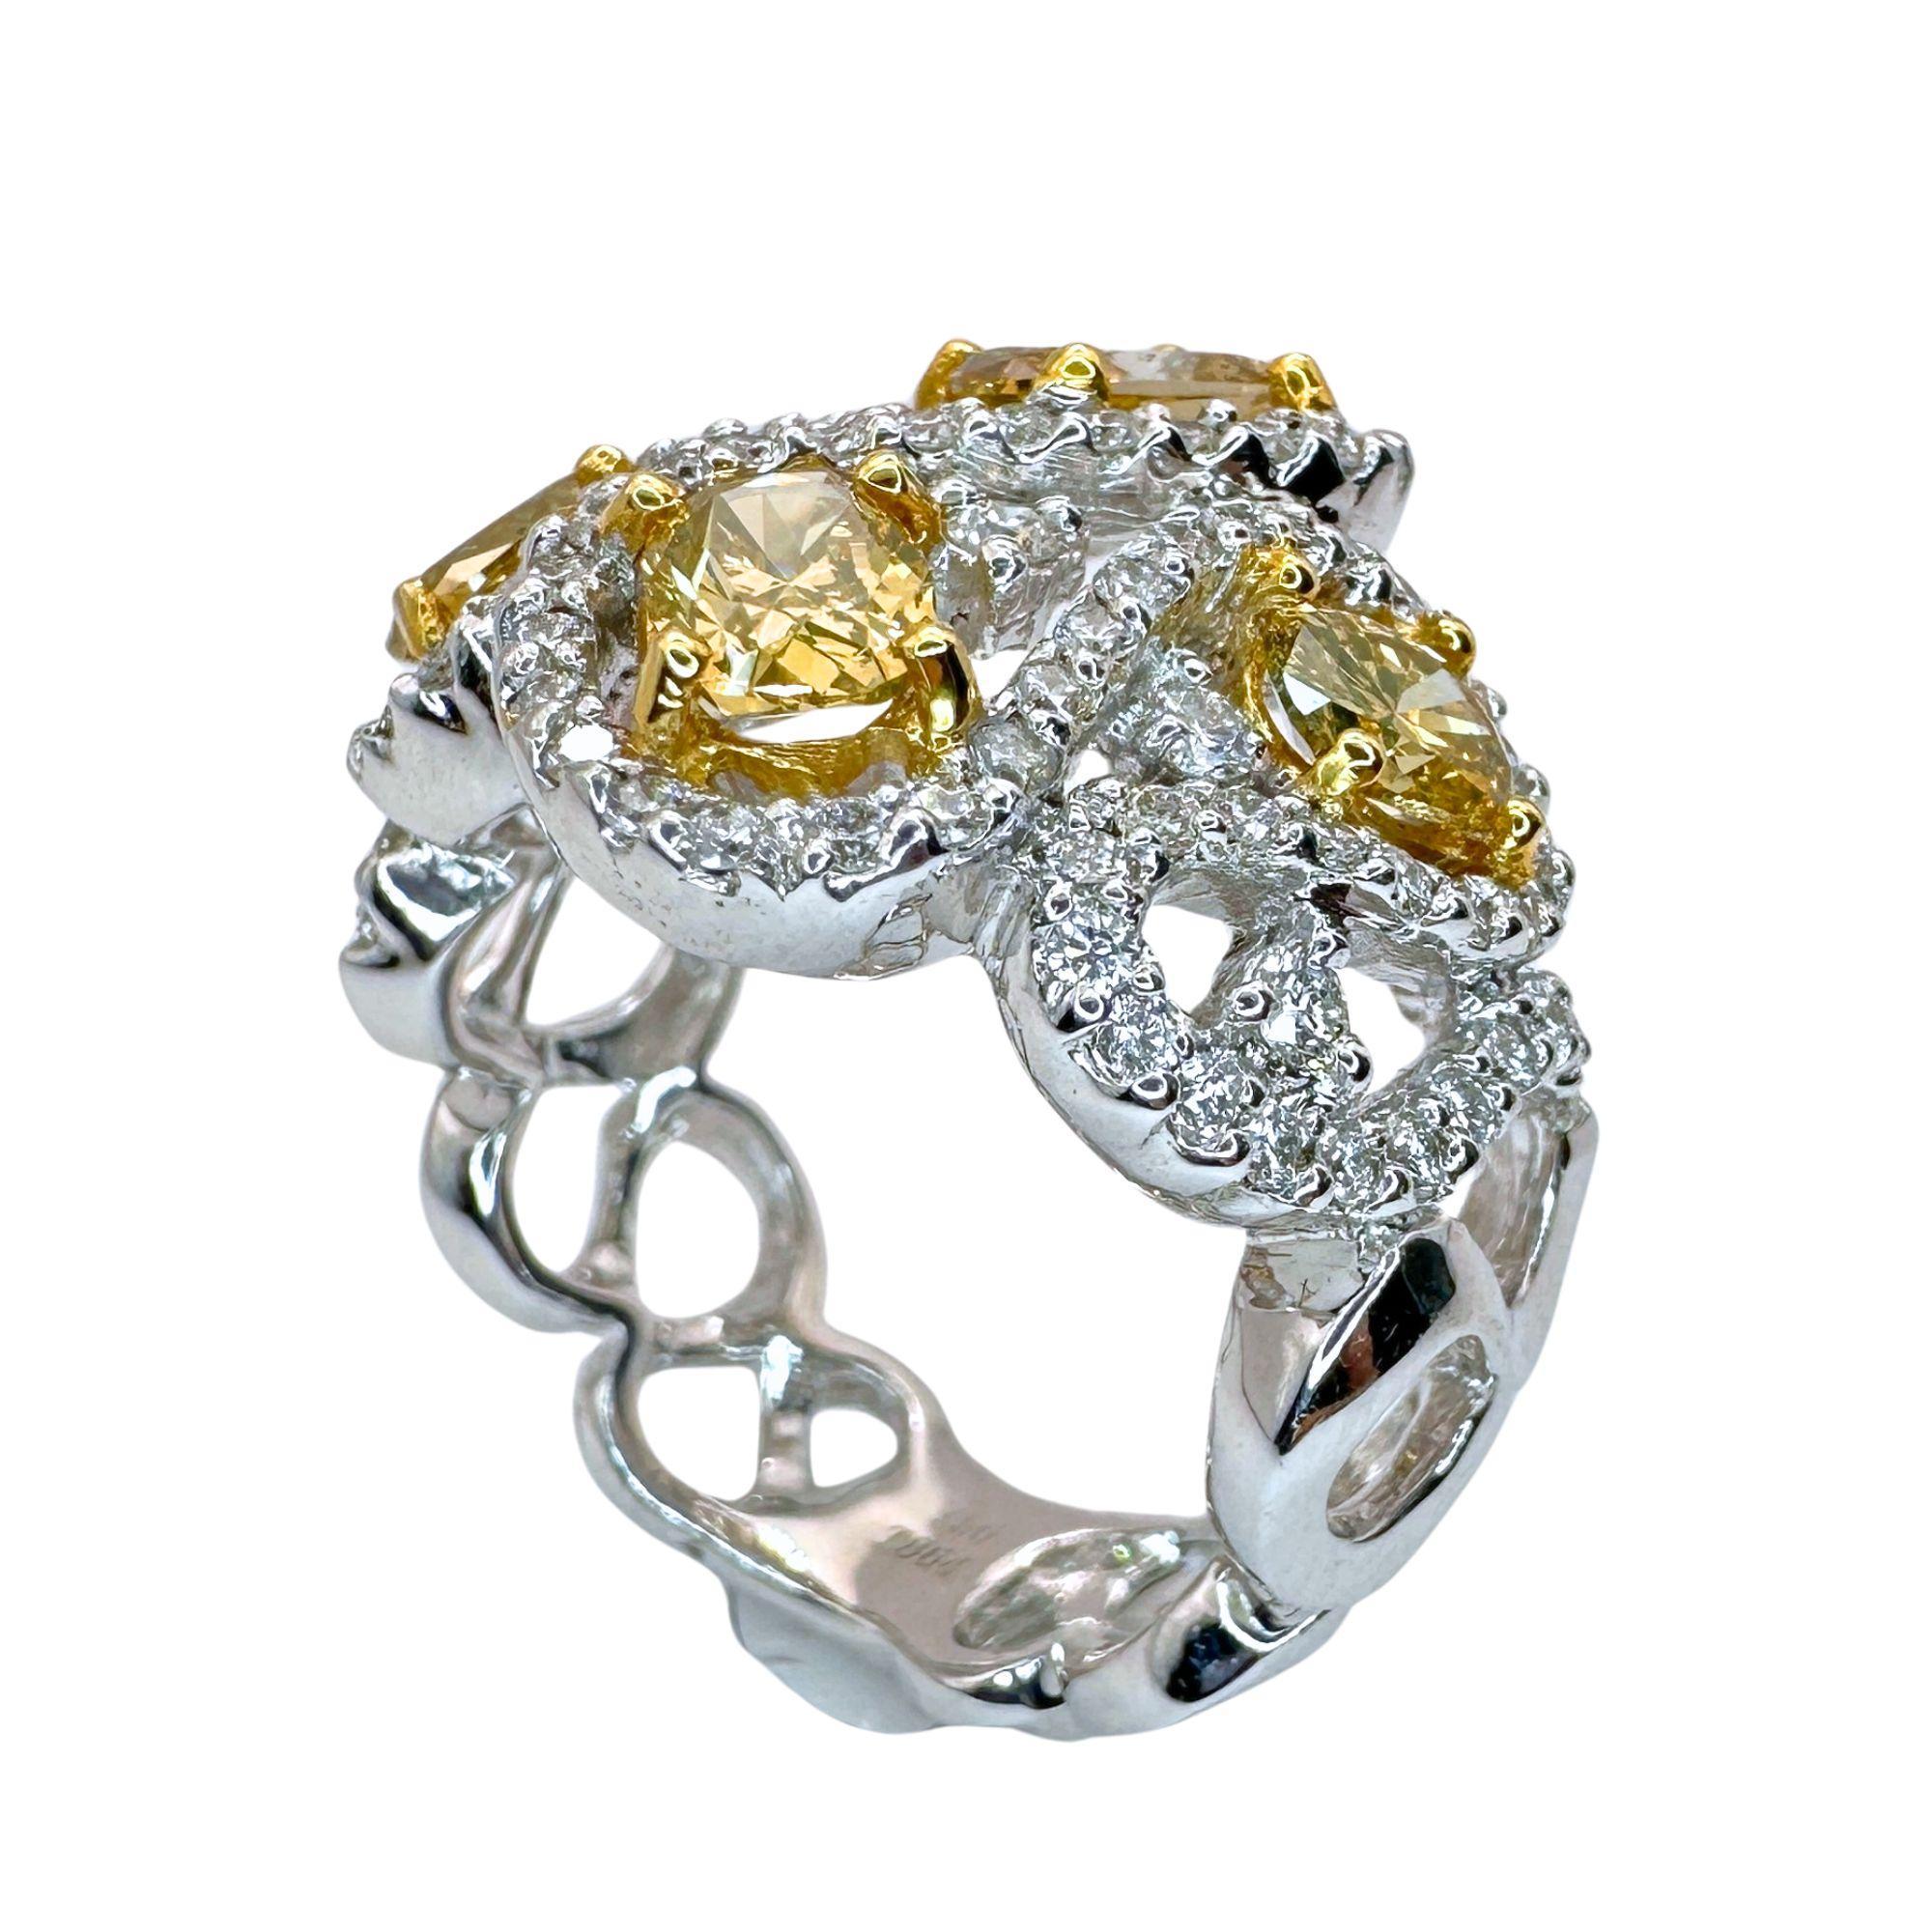 Treat yourself to the epitome of luxury with this breathtaking 18k White and Yellow Diamond Ring. Crafted with the utmost care, this ring weighs a substantial 10.13 grams and is perfectly sized at 6.50 to ensure a comfortable and flattering fit.Be